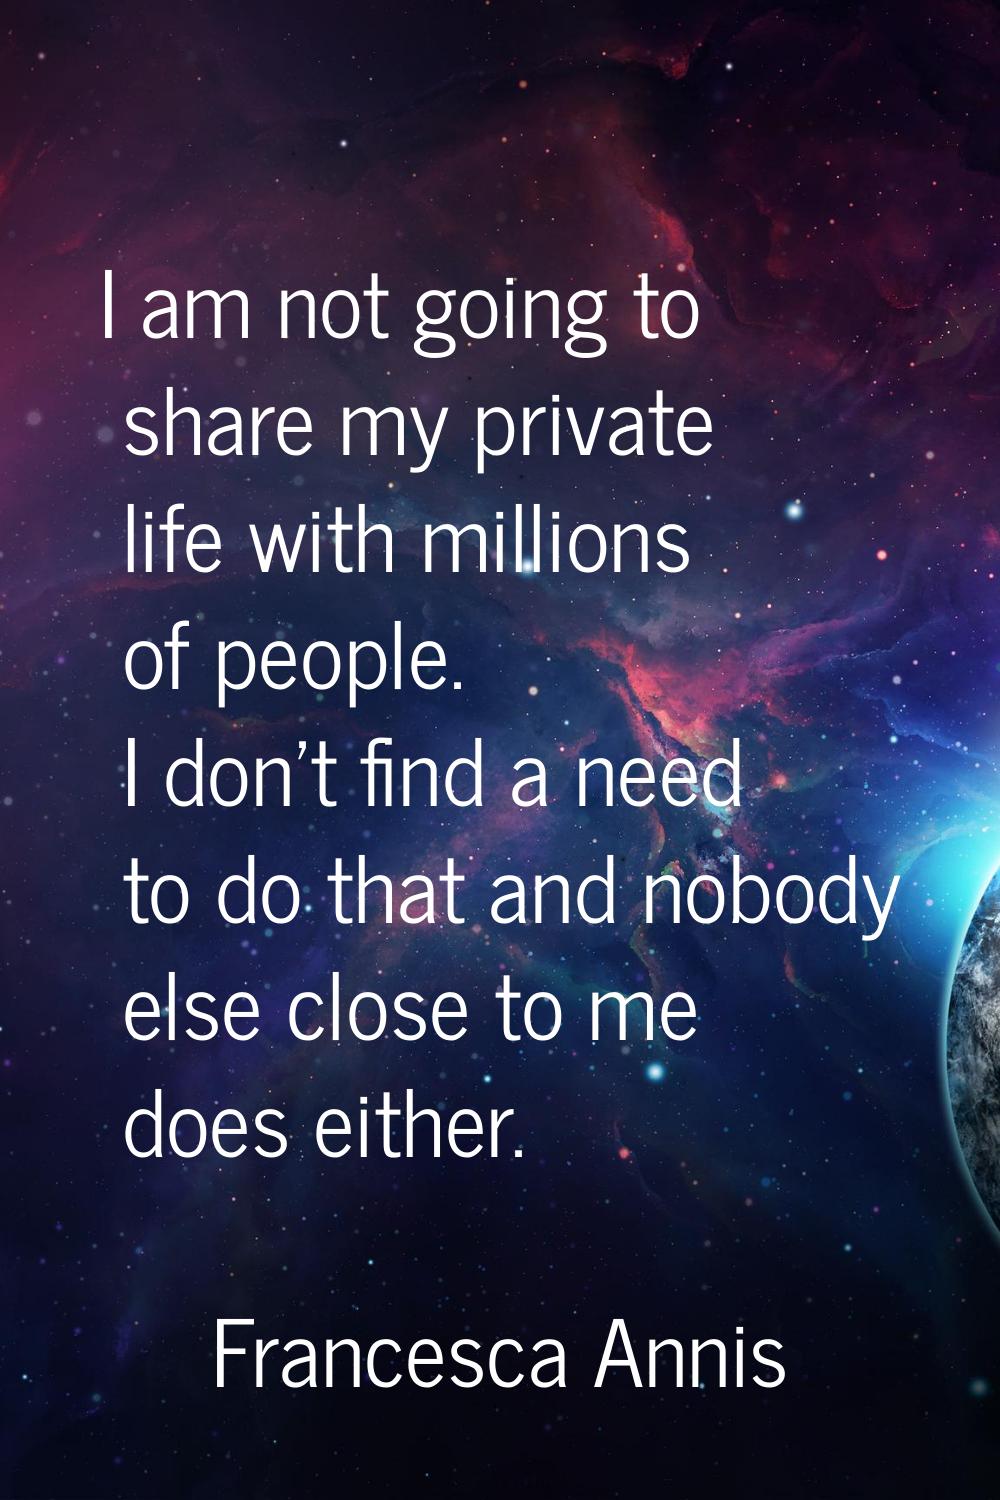 I am not going to share my private life with millions of people. I don't find a need to do that and